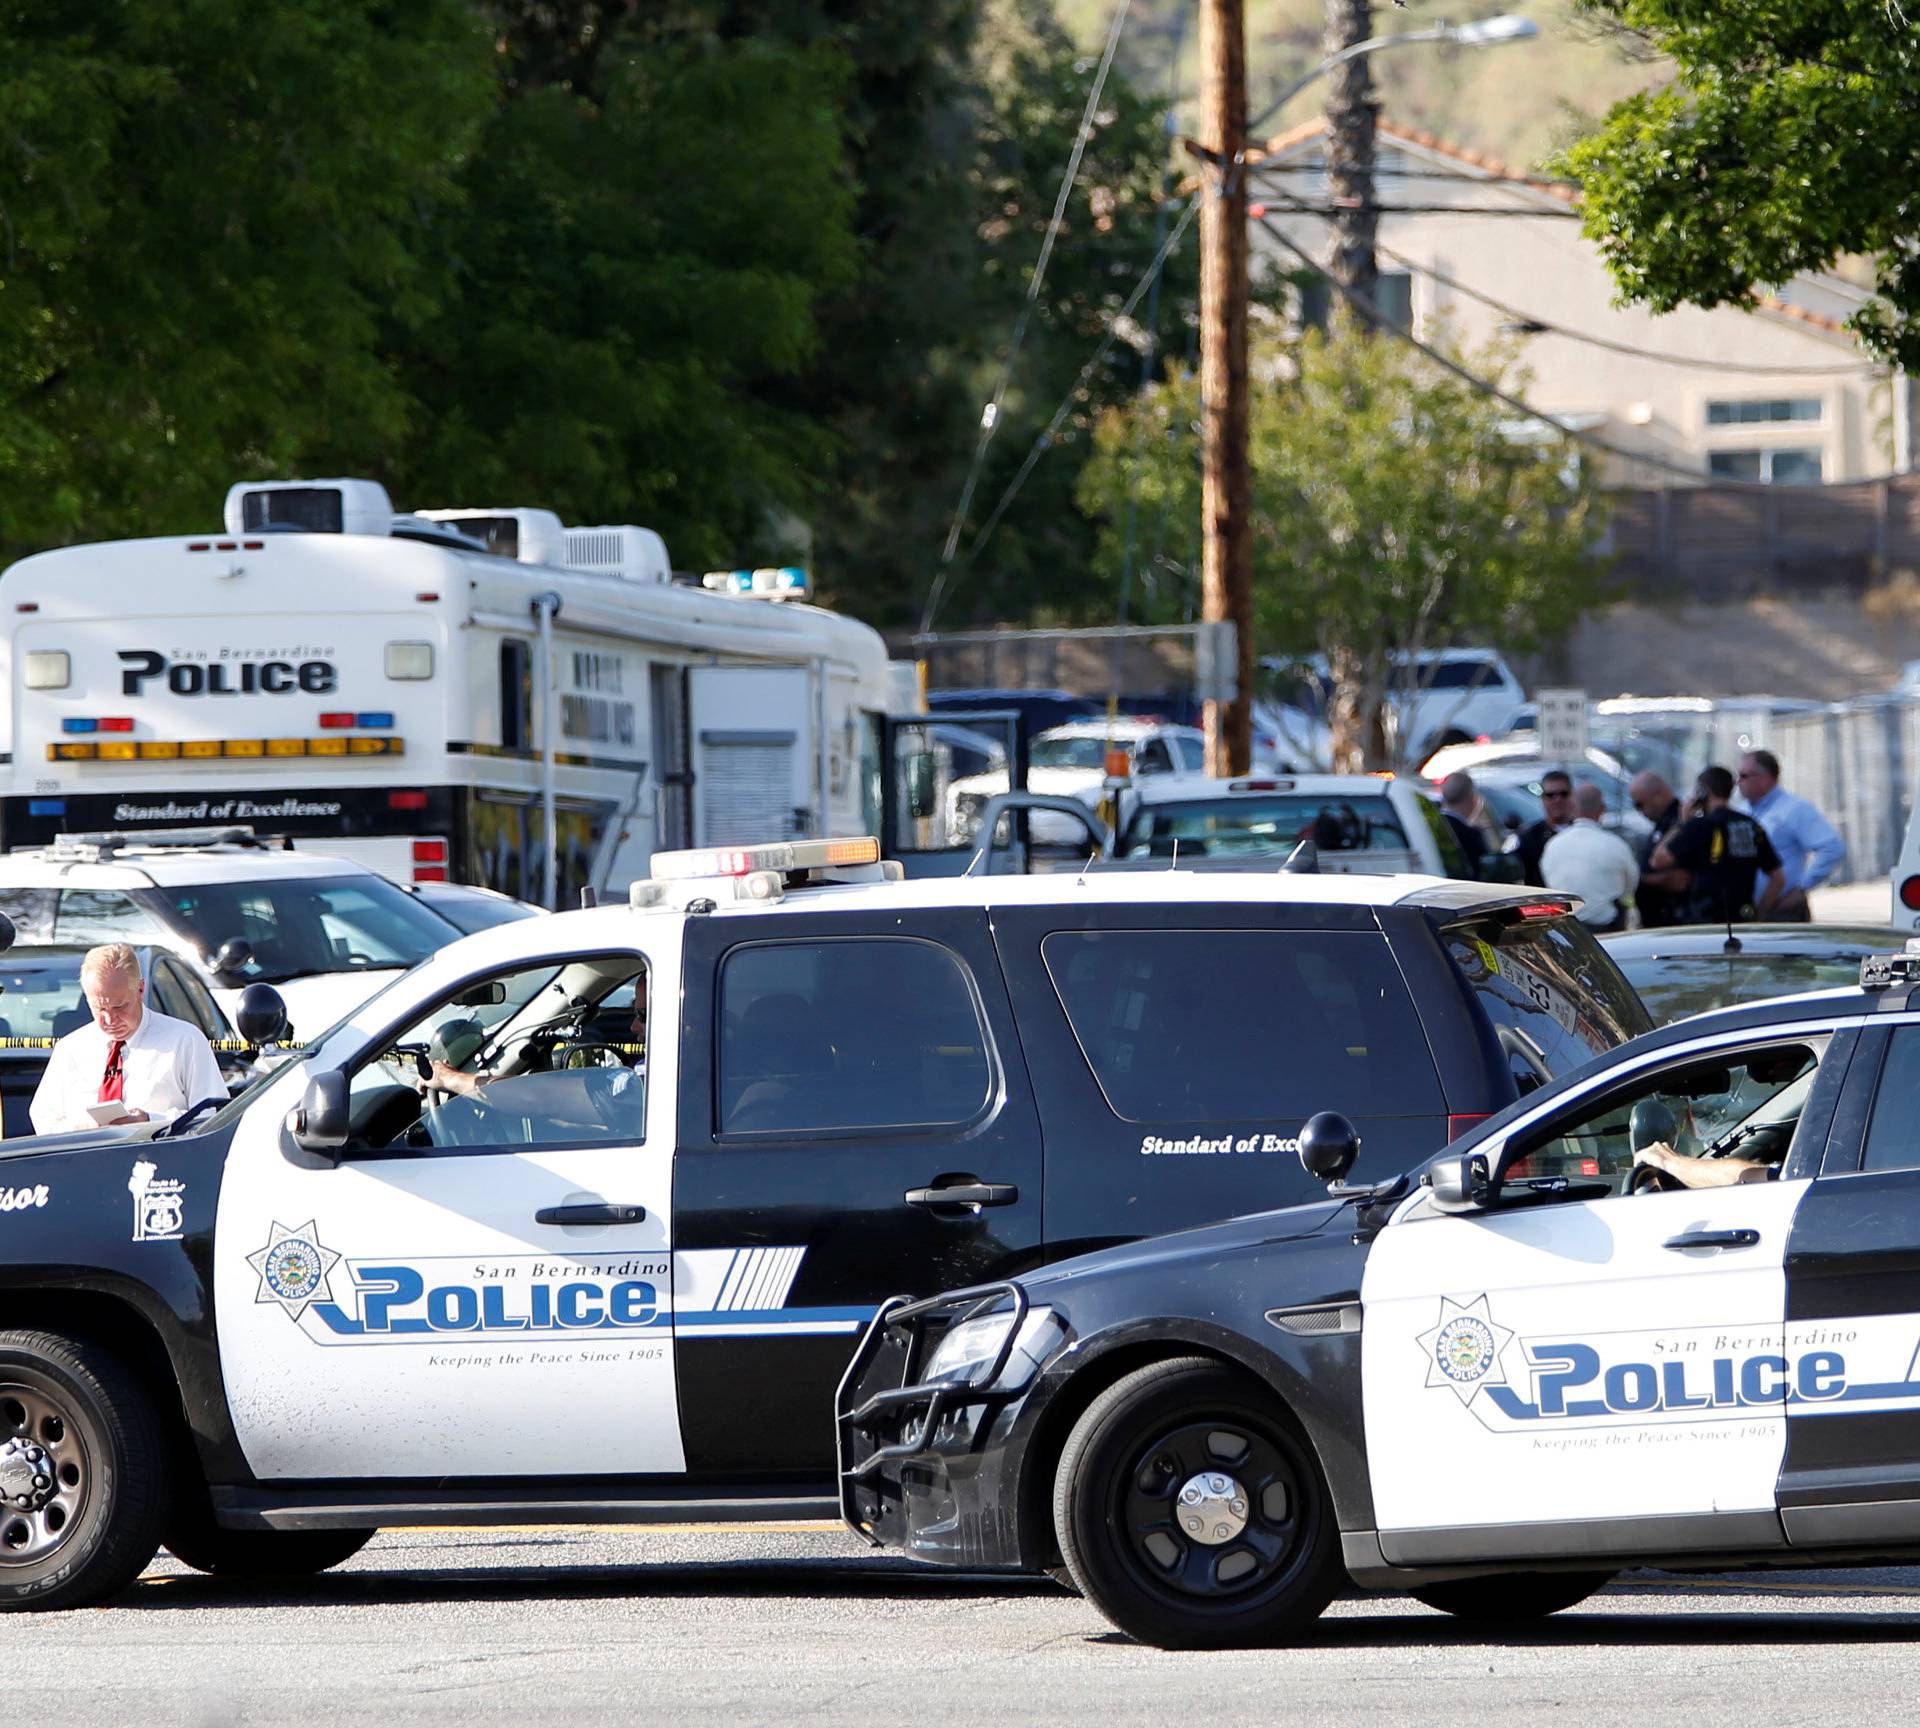 Police vehicles are pictured after a shooting at North Park Elementary School in San Bernardino